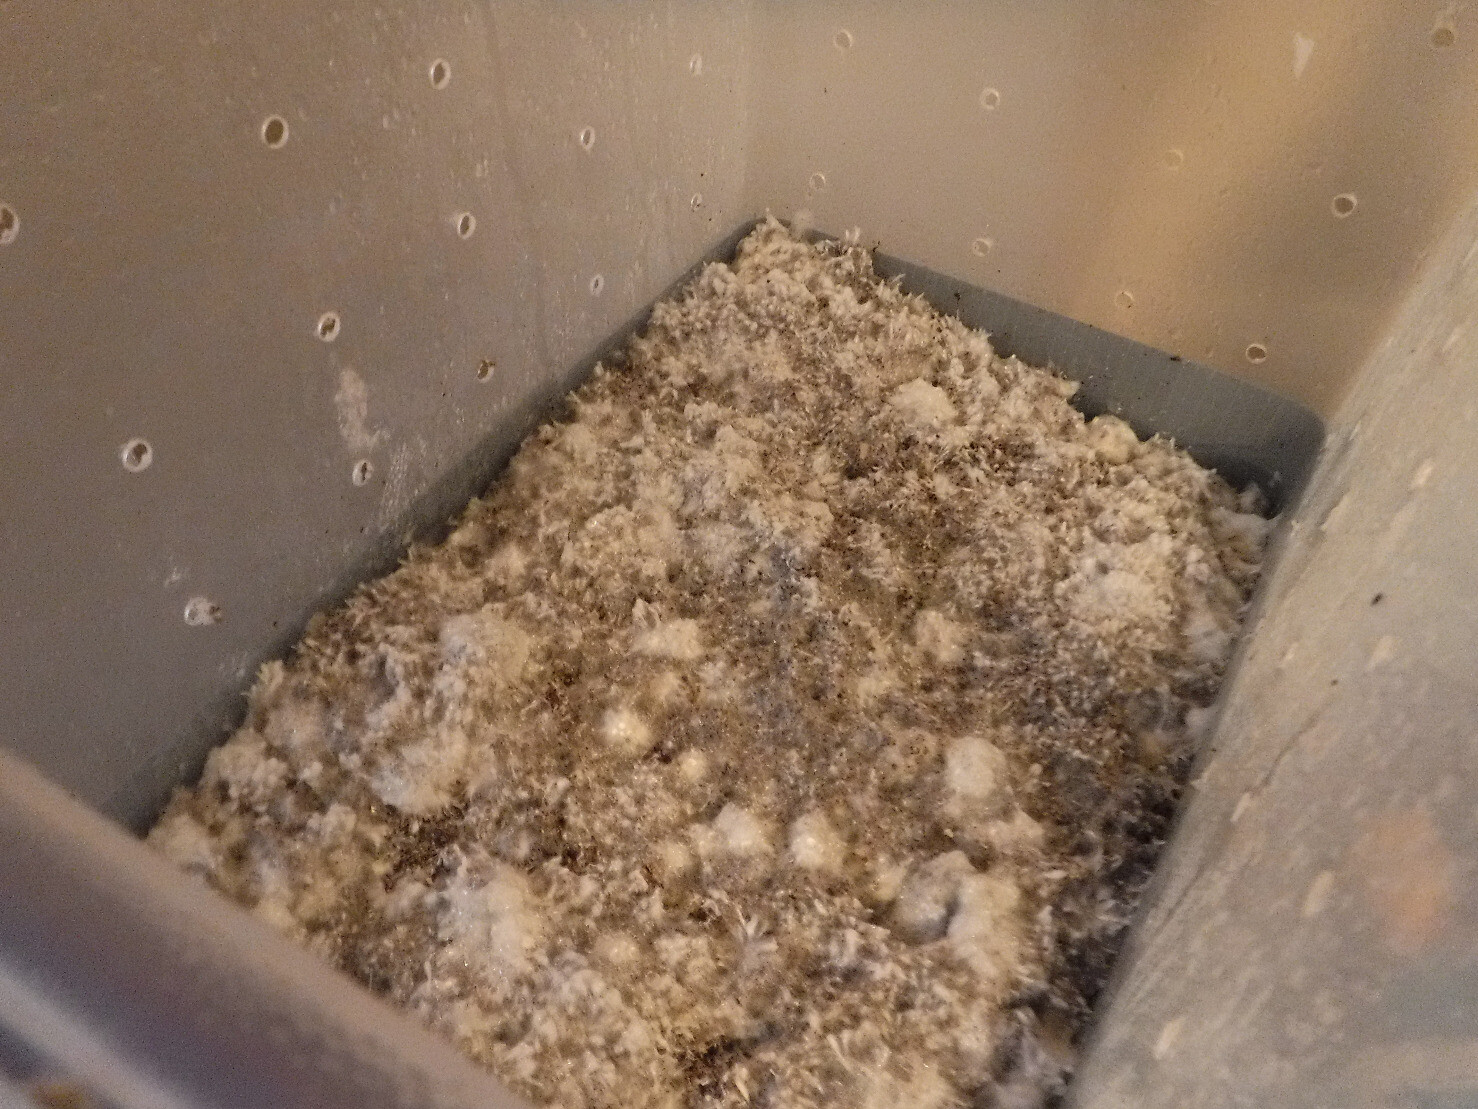 Mycelia growing in a plastic container